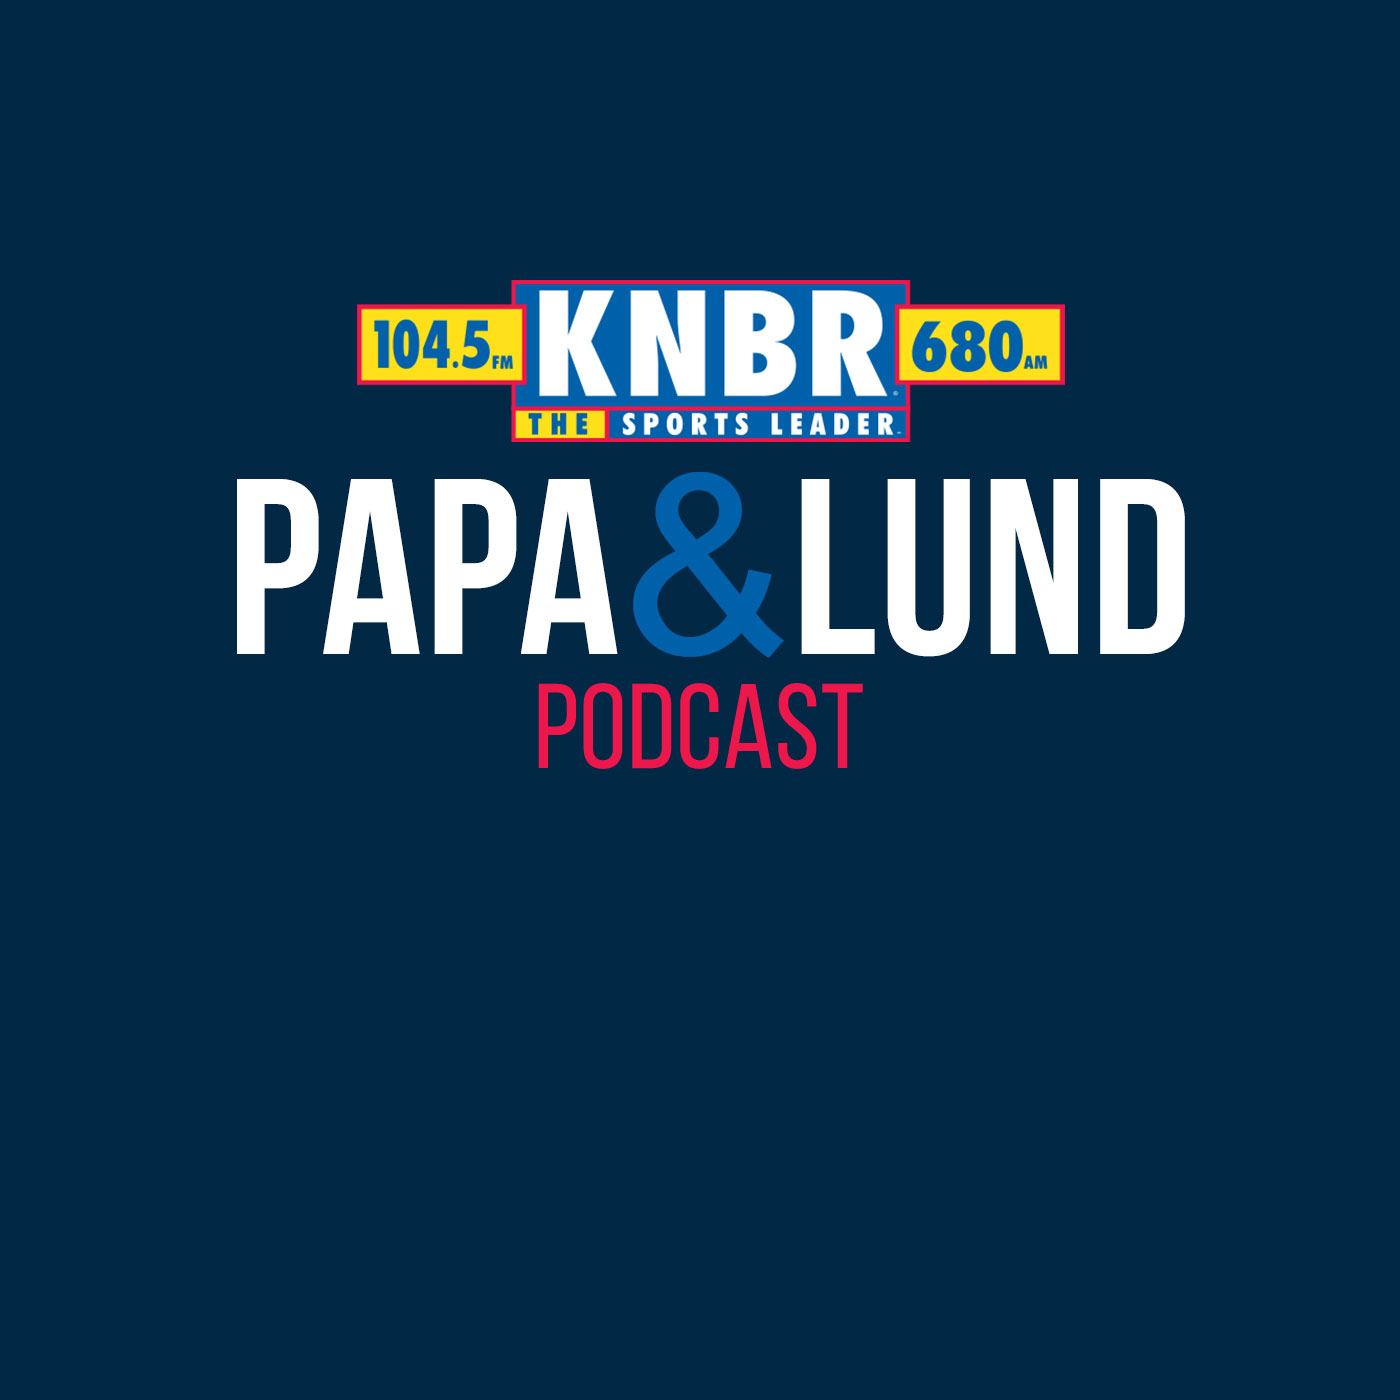 12-20 Brian Scalabrine joins Papa & Lund to discuss the Celtics collapse late in the game and how the Warriors are still a team the NBA needs to look out for